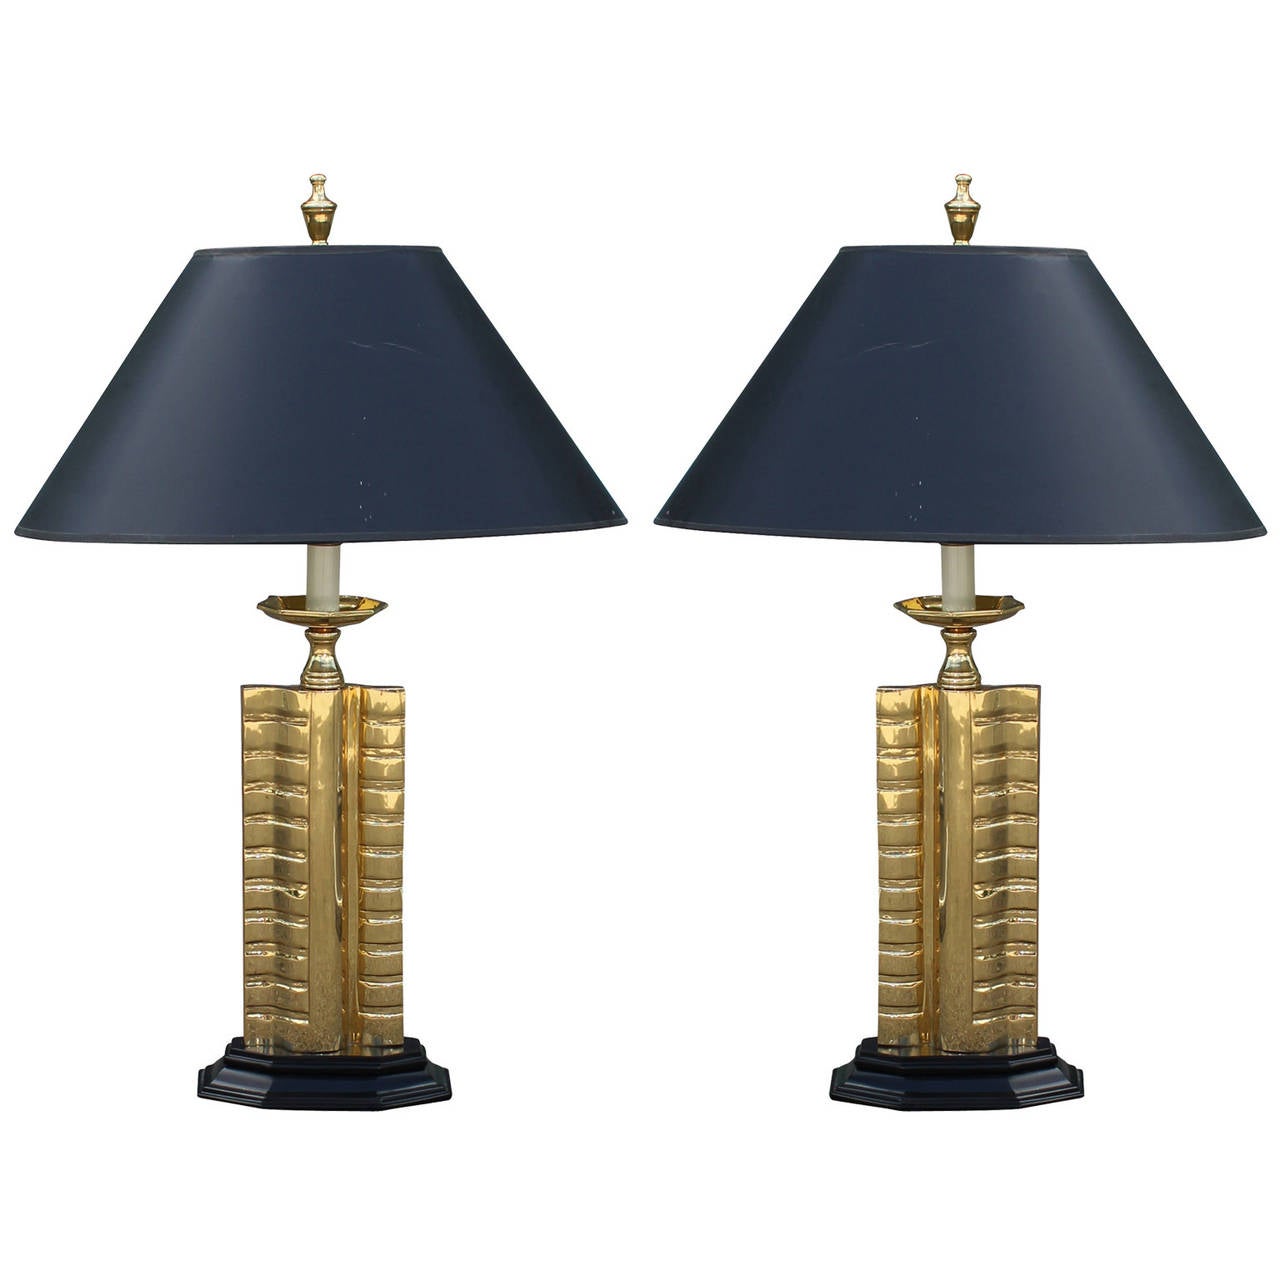 Great heavy pair of shiny Gold and brass table lamps. Lamps sit on black bases and which tie in with the matching black shades.